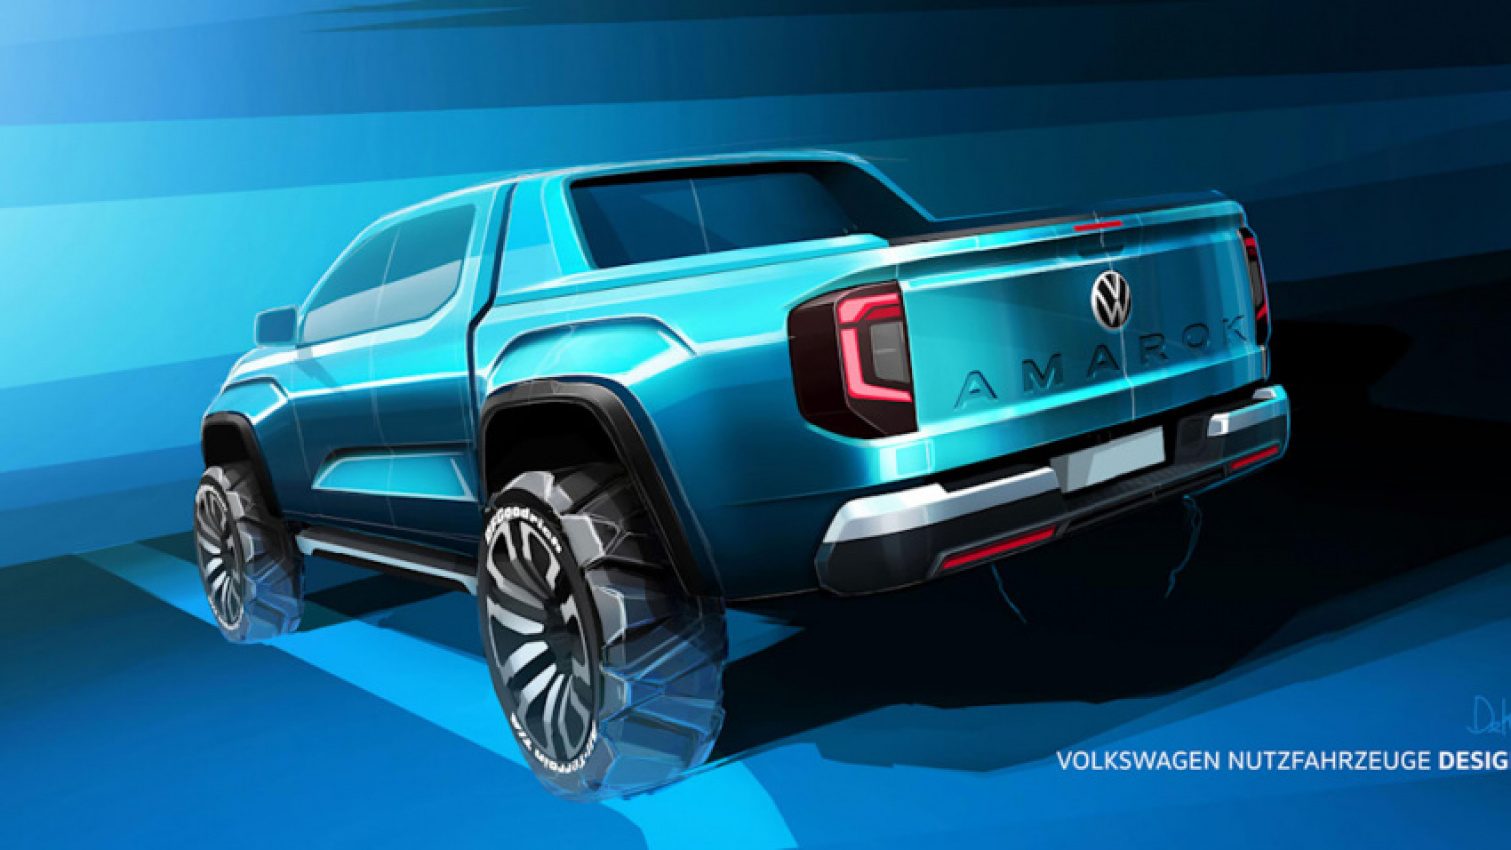 autos, cars, design/style, ford, ford ranger, off-road vehicles, truck, volkswagen, ford ranger-based vw amarok previewed with brawnier design